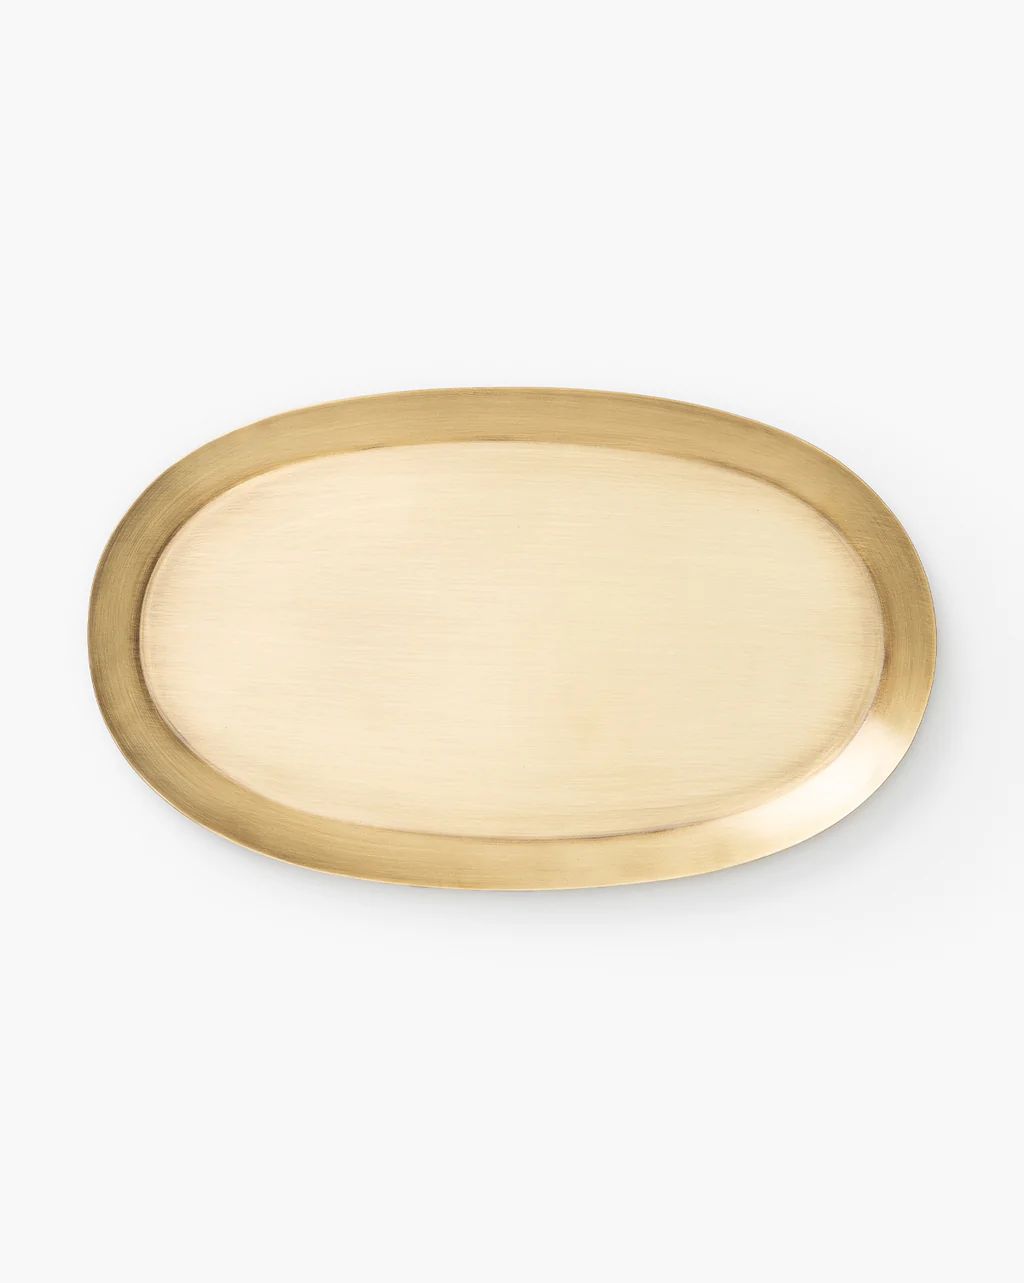 Brass Oval Tray | McGee & Co.